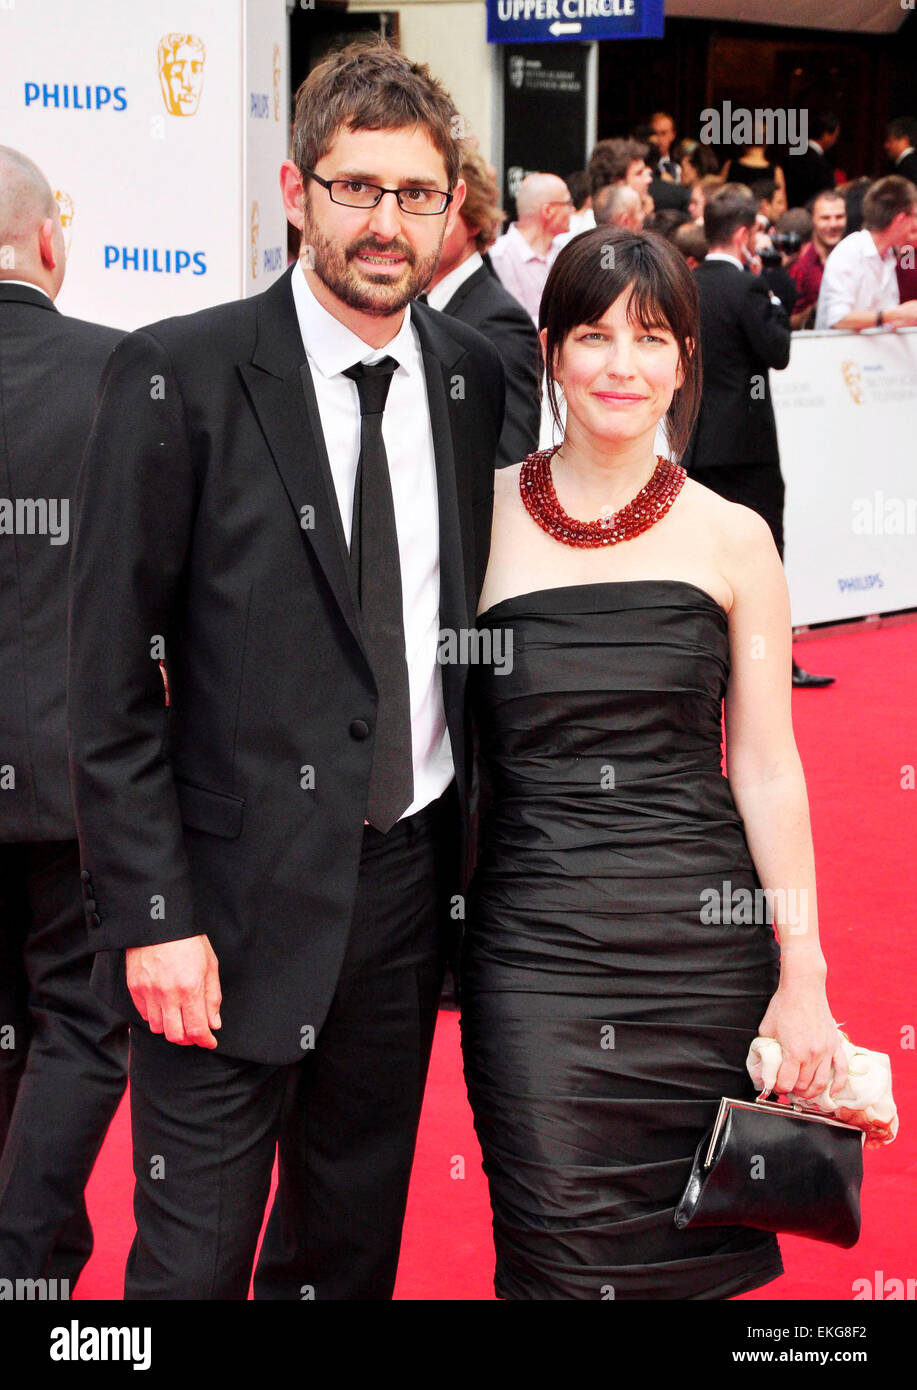 06.JUNE.2010. LONDON LOUIS THEROUX AND WIFE ATTEND THE 2010 TV BAFTA Stock Photo: 80877862 - Alamy